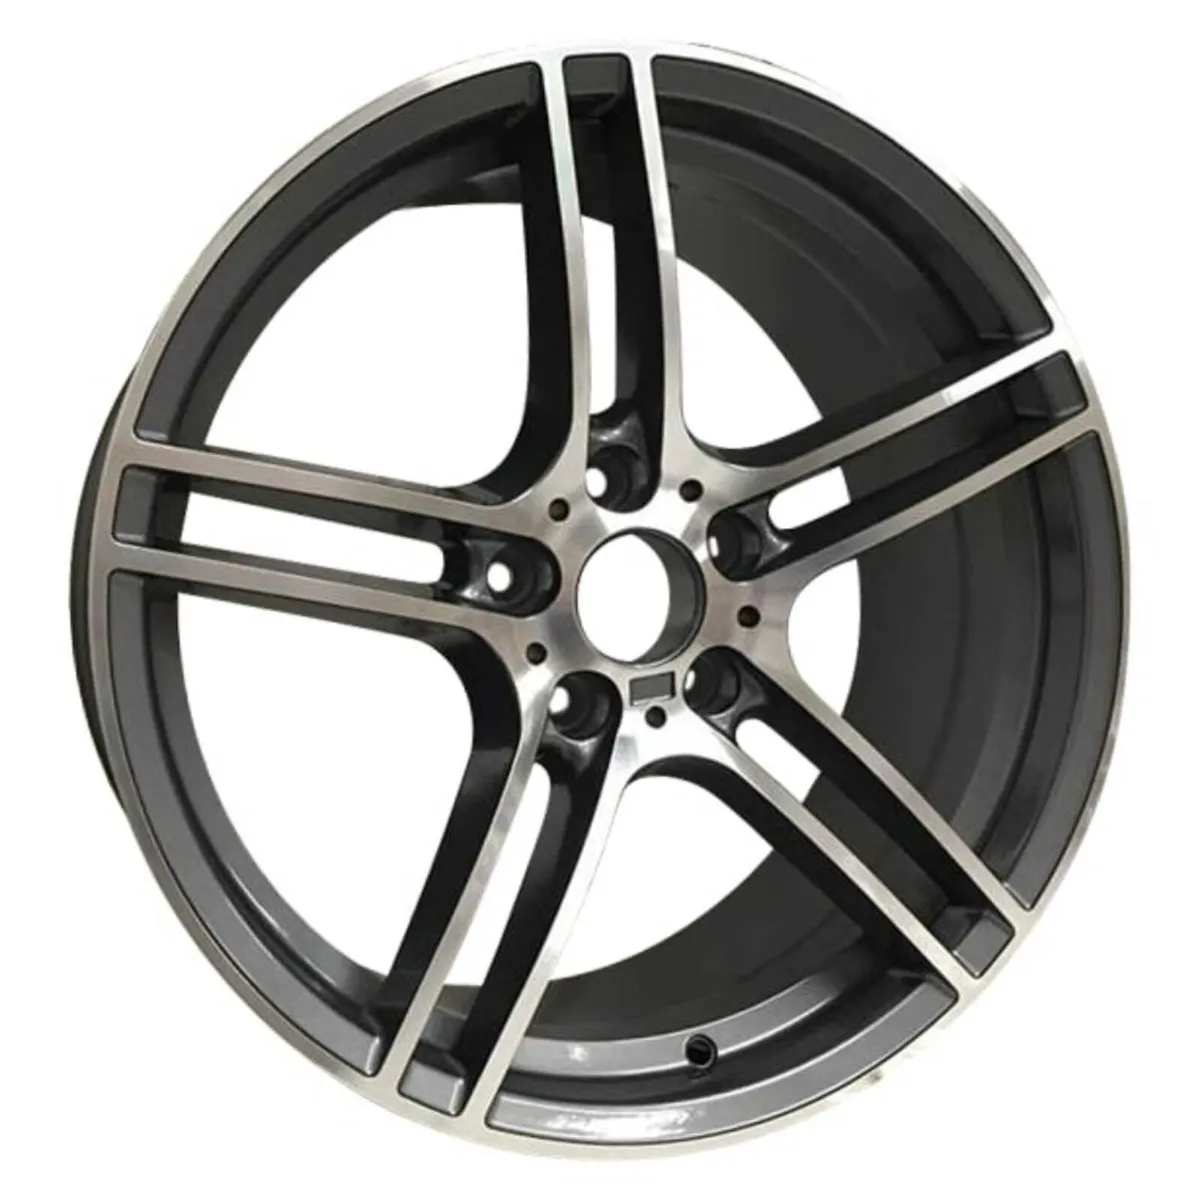 19" 313 Style Wheels Fits BMW 3 Series - Image 1